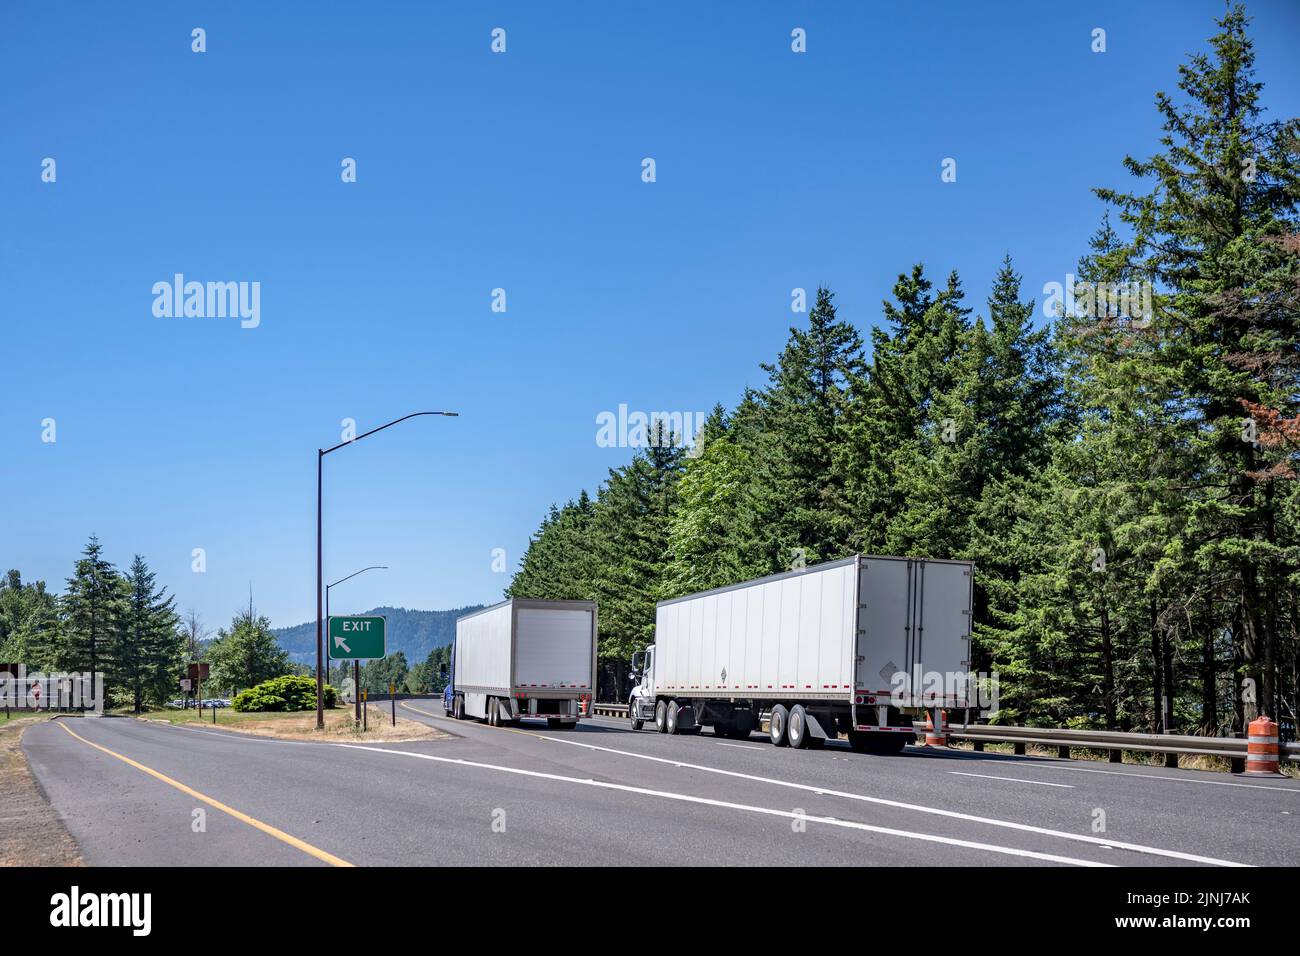 Convoy of tow different industrial freight big rigs semi trucks with dry van semi trailers transporting cargo running on the turning highway road with Stock Photo